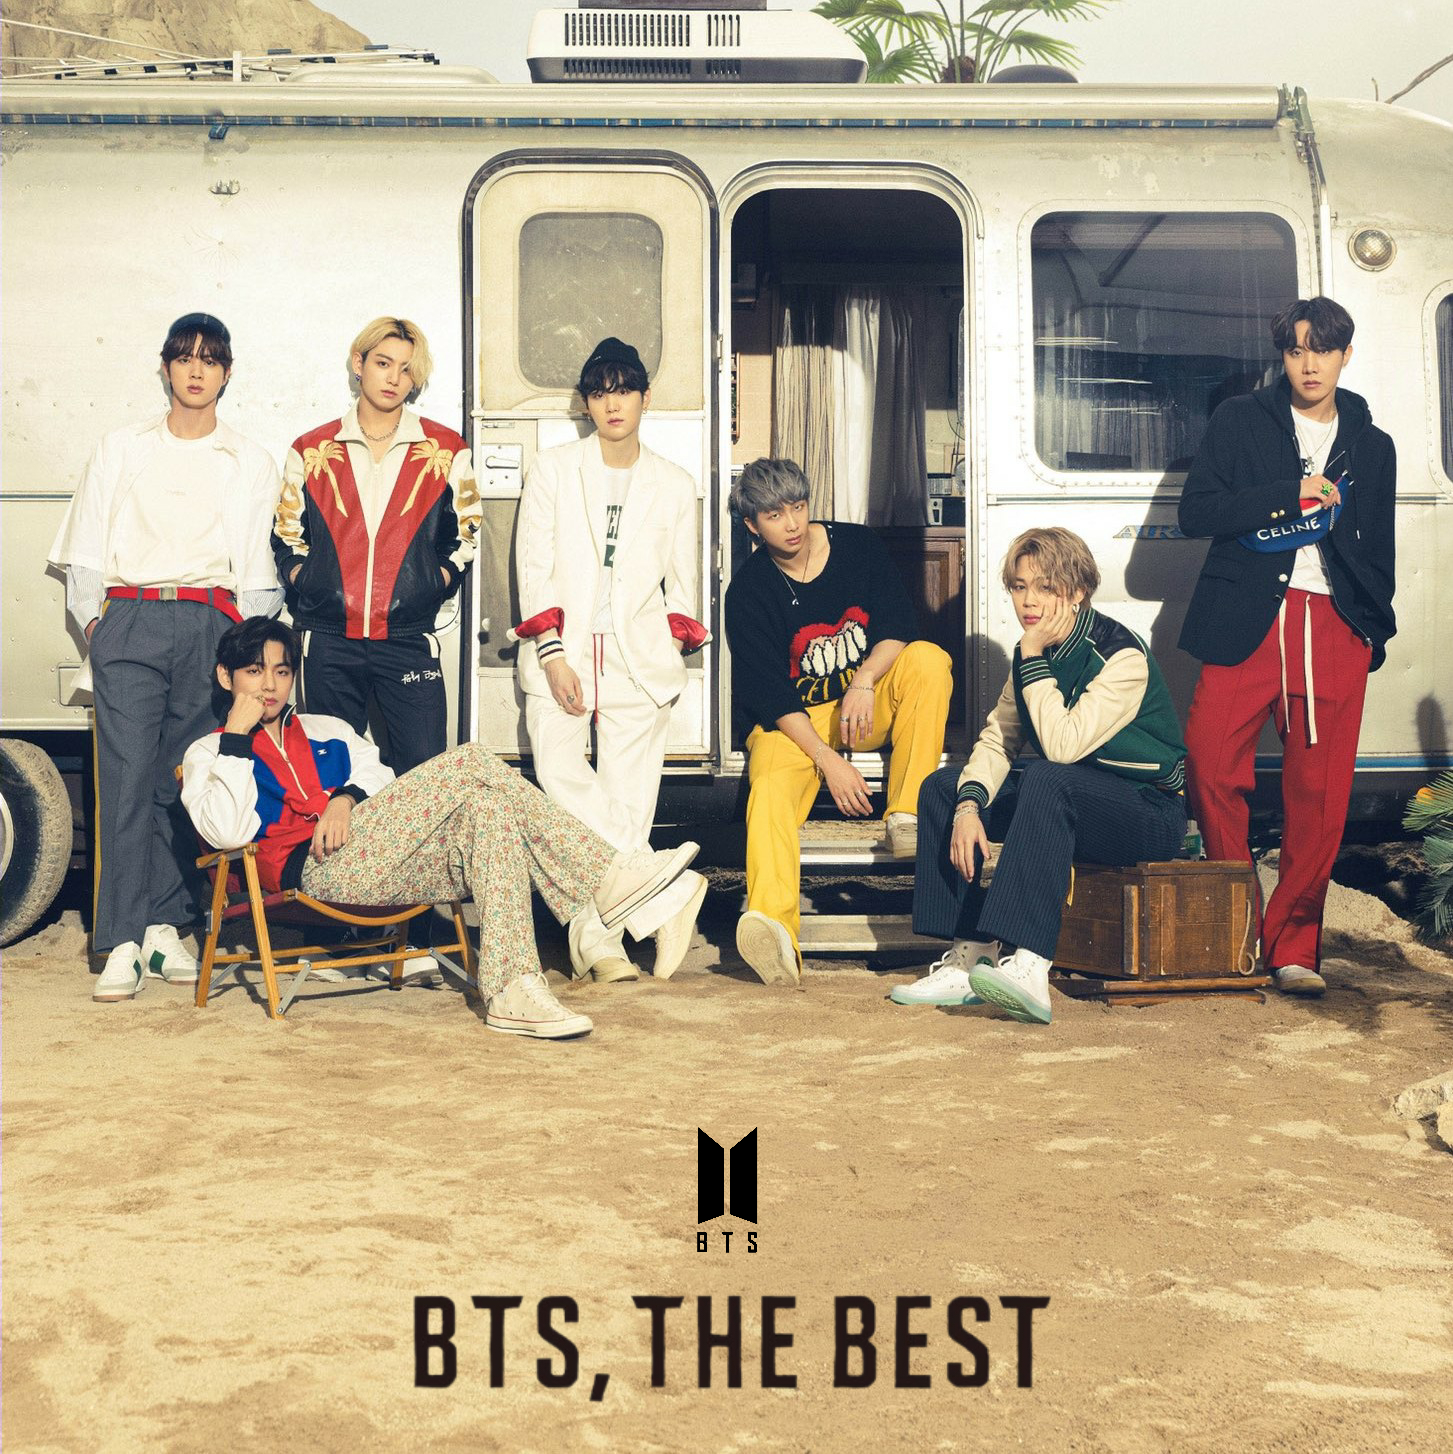 BTS - THE BEST (ALBUM COVER) by Kyliemaine on DeviantArt